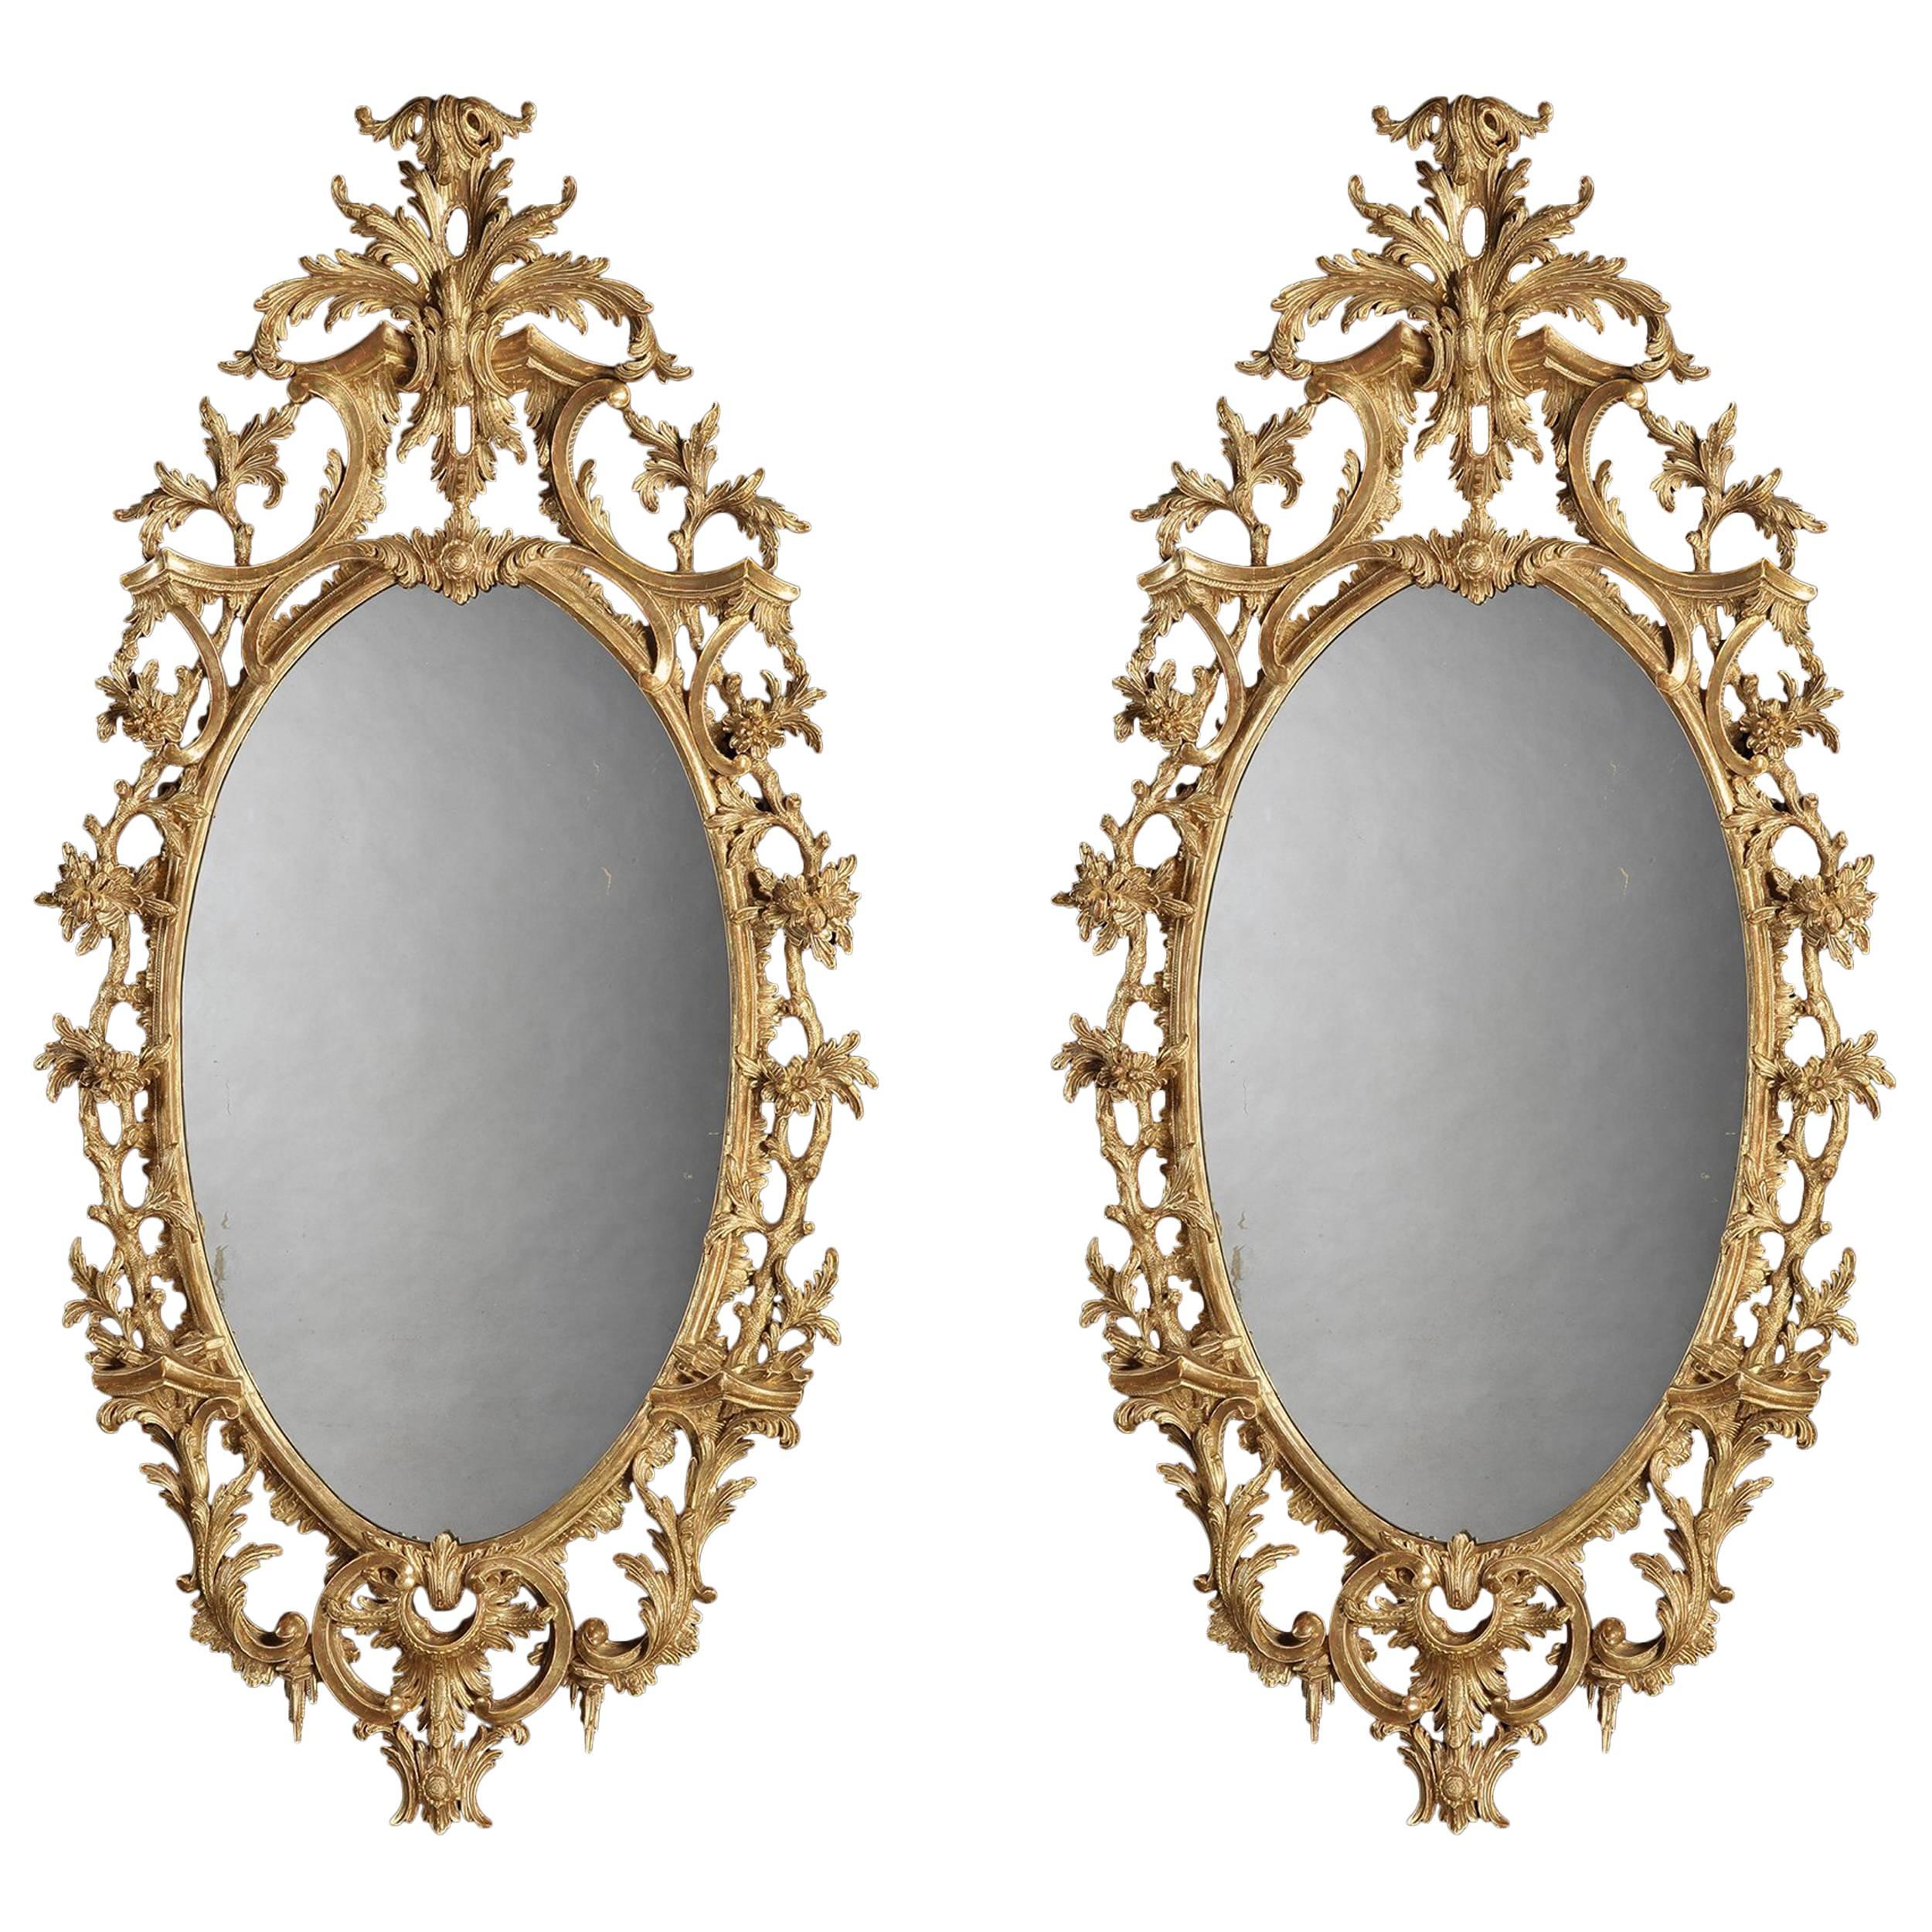 Pair of 19th Century English Giltwood Mirrors in the George III Style